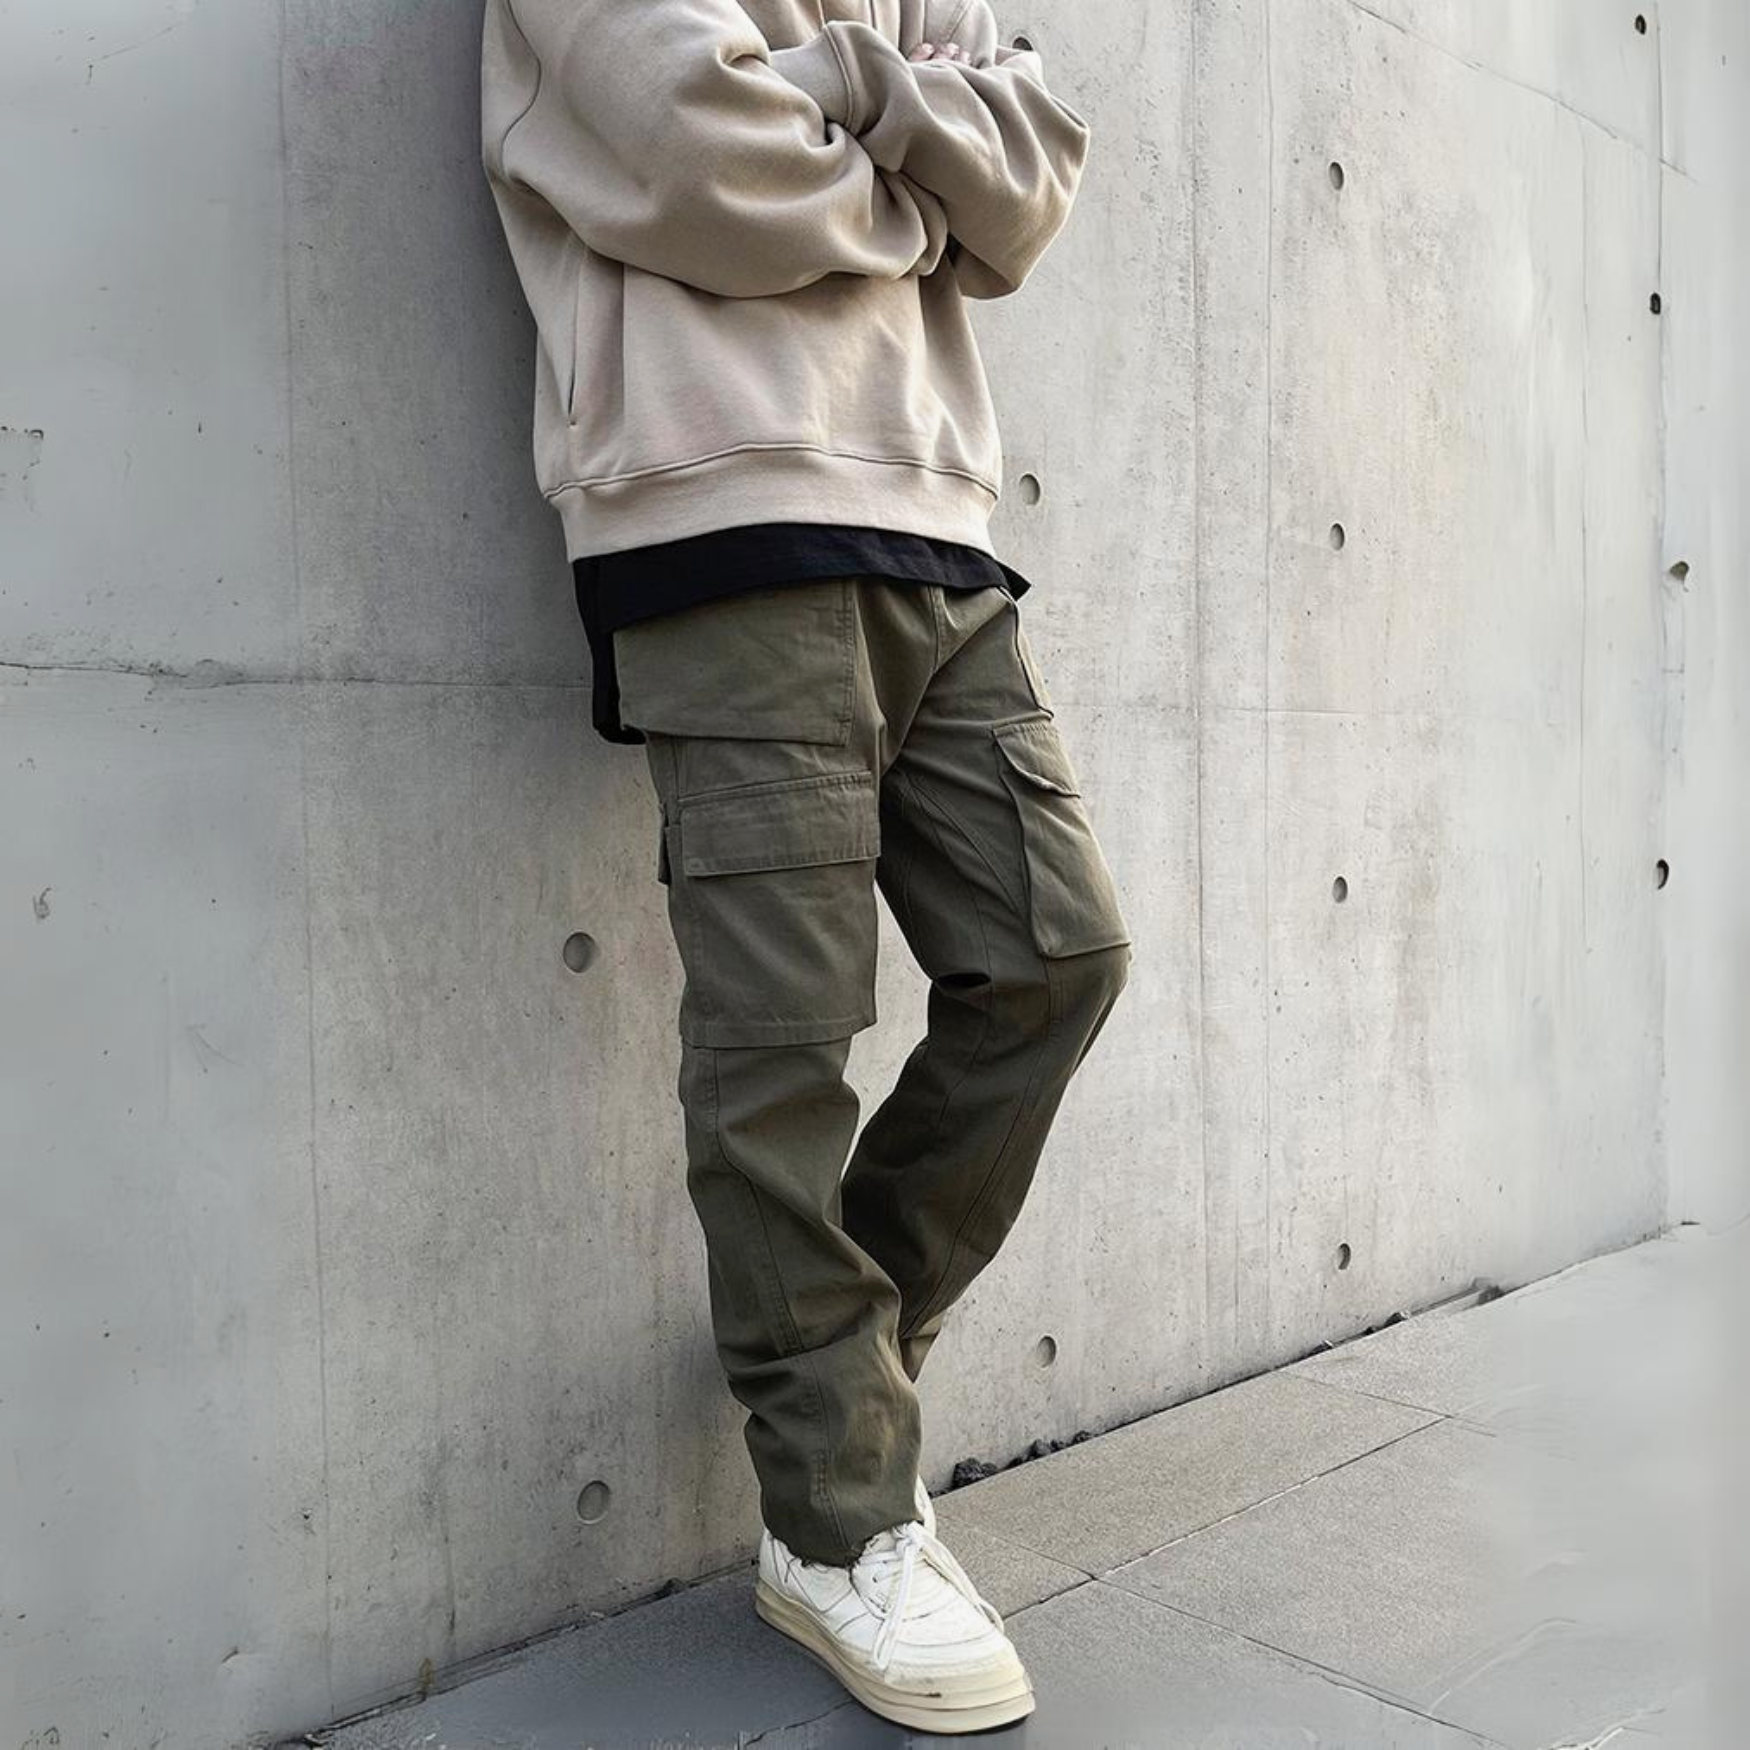 Revolution Cargo Pants V2 | Cargo pants outfit men, Green cargo pants outfit,  Green shoes outfit